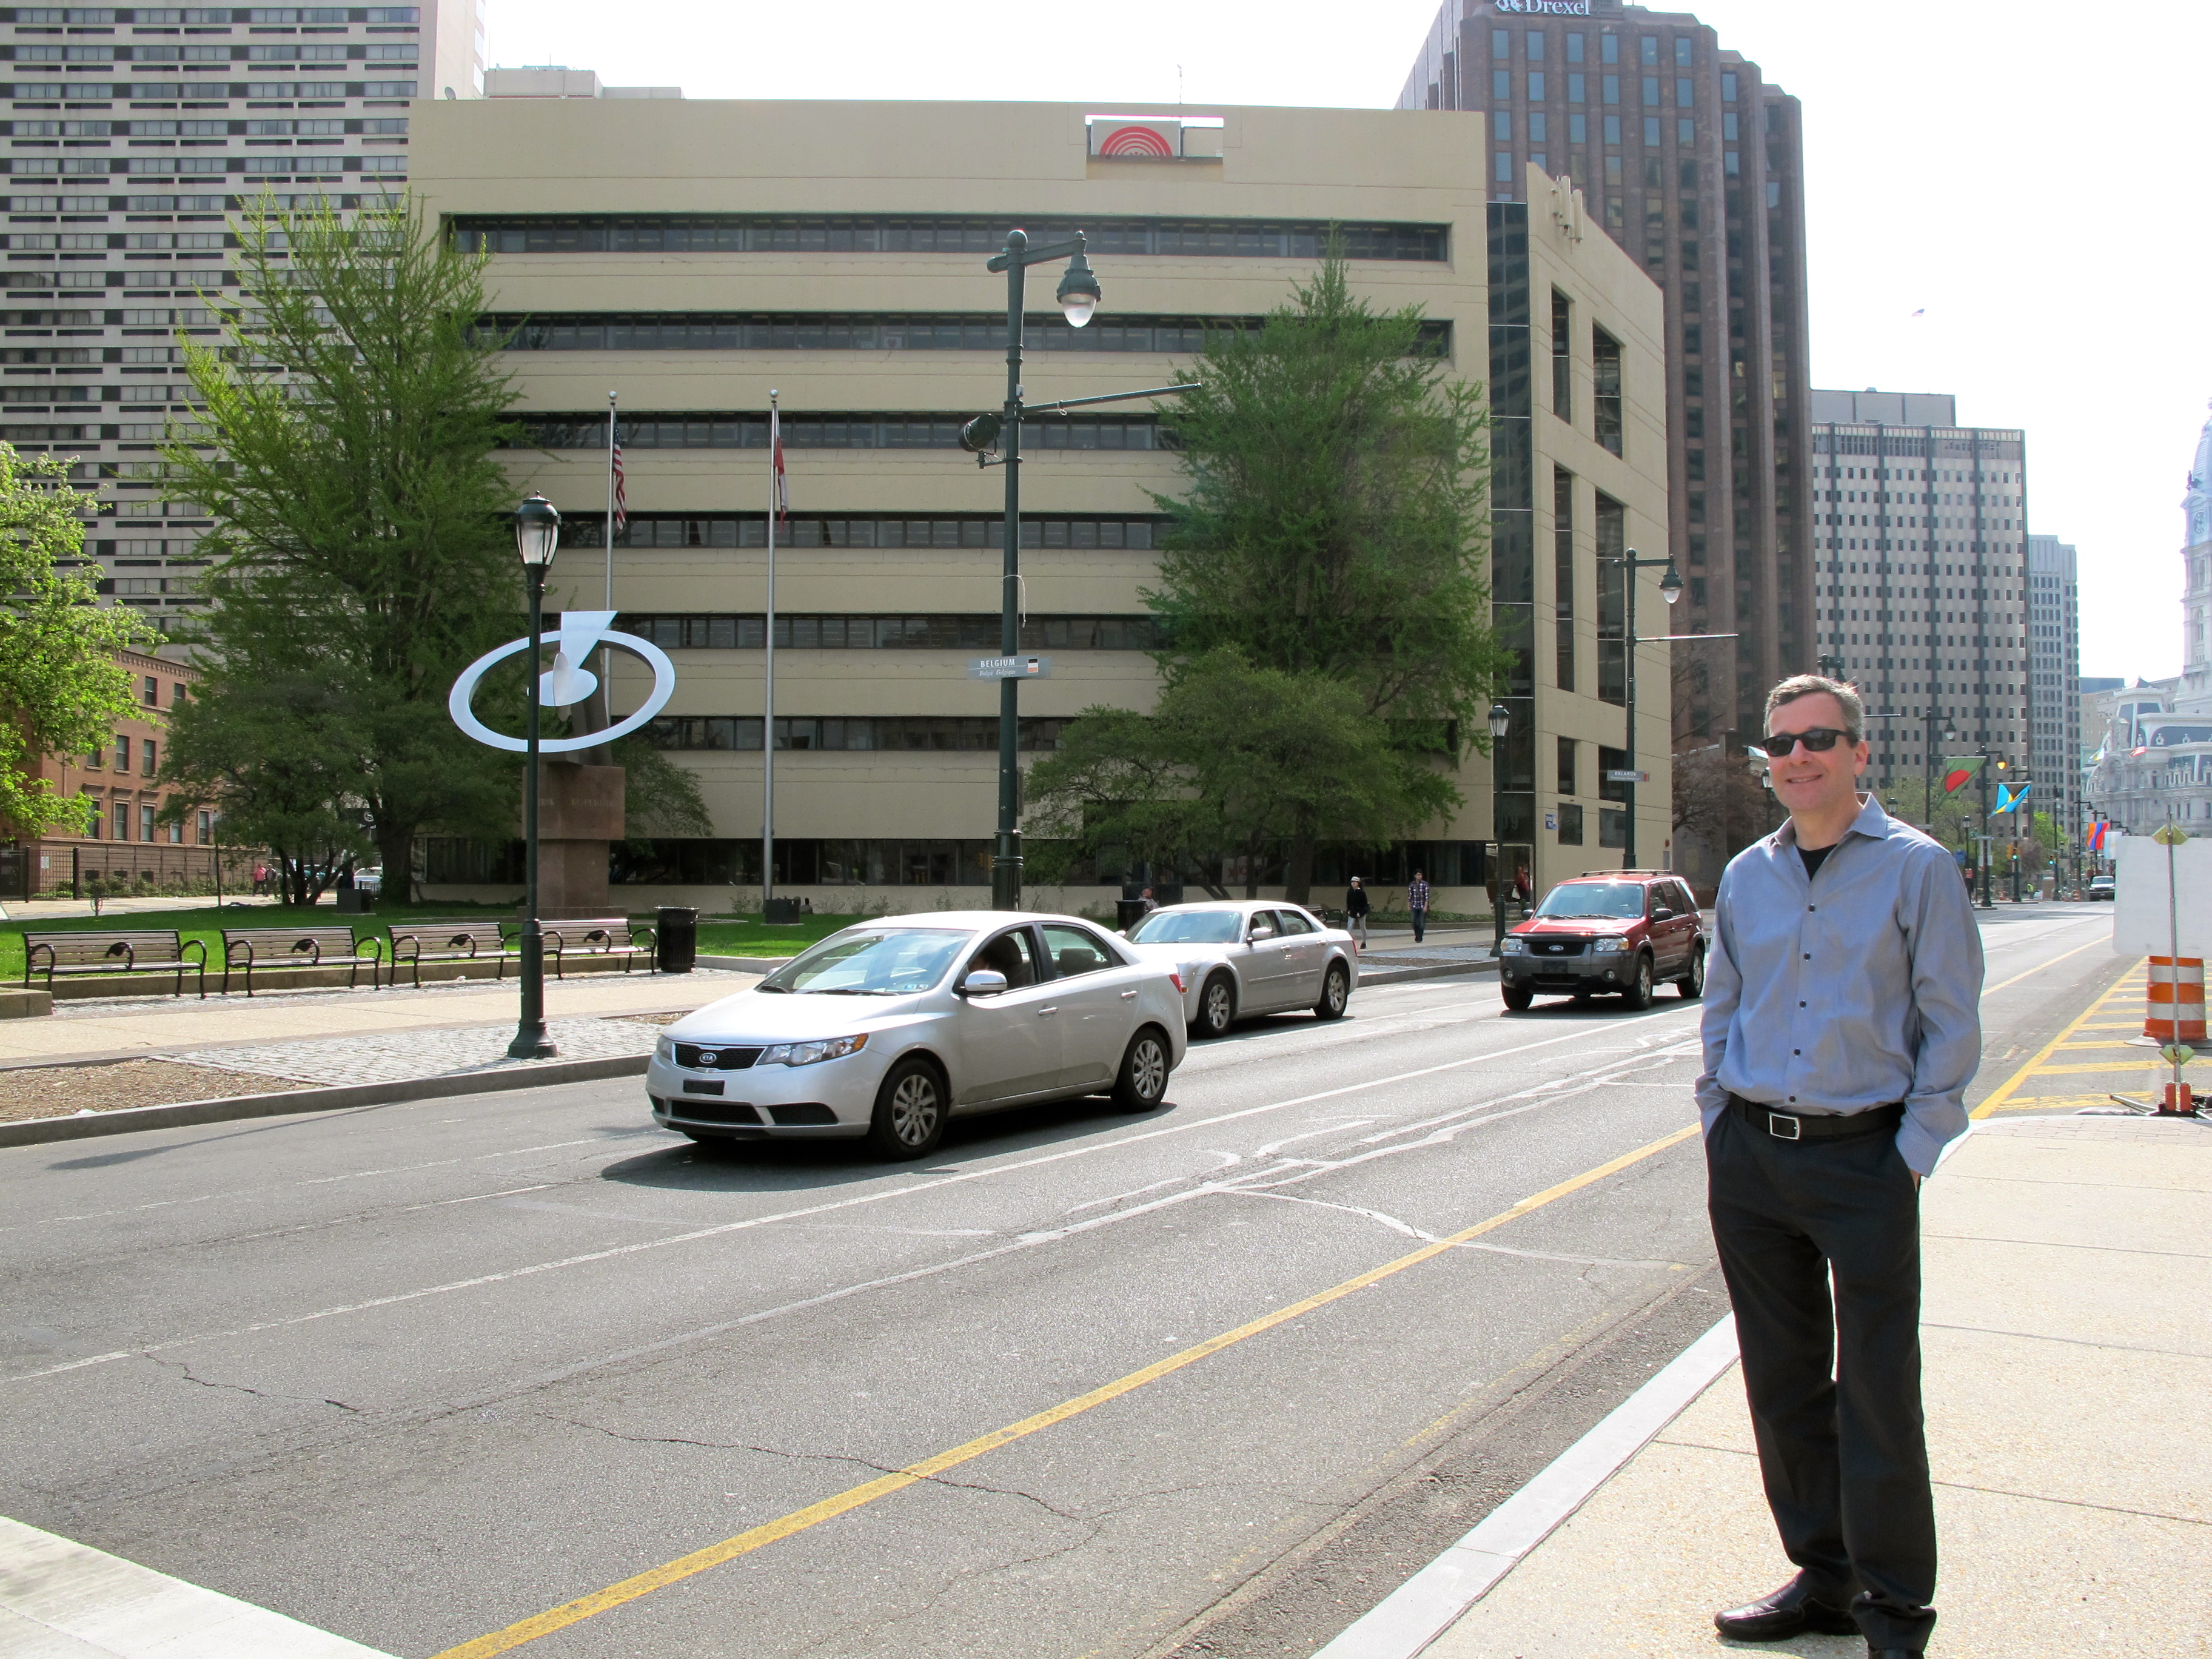 Richard Maimon on the Parkway, United Way building at background